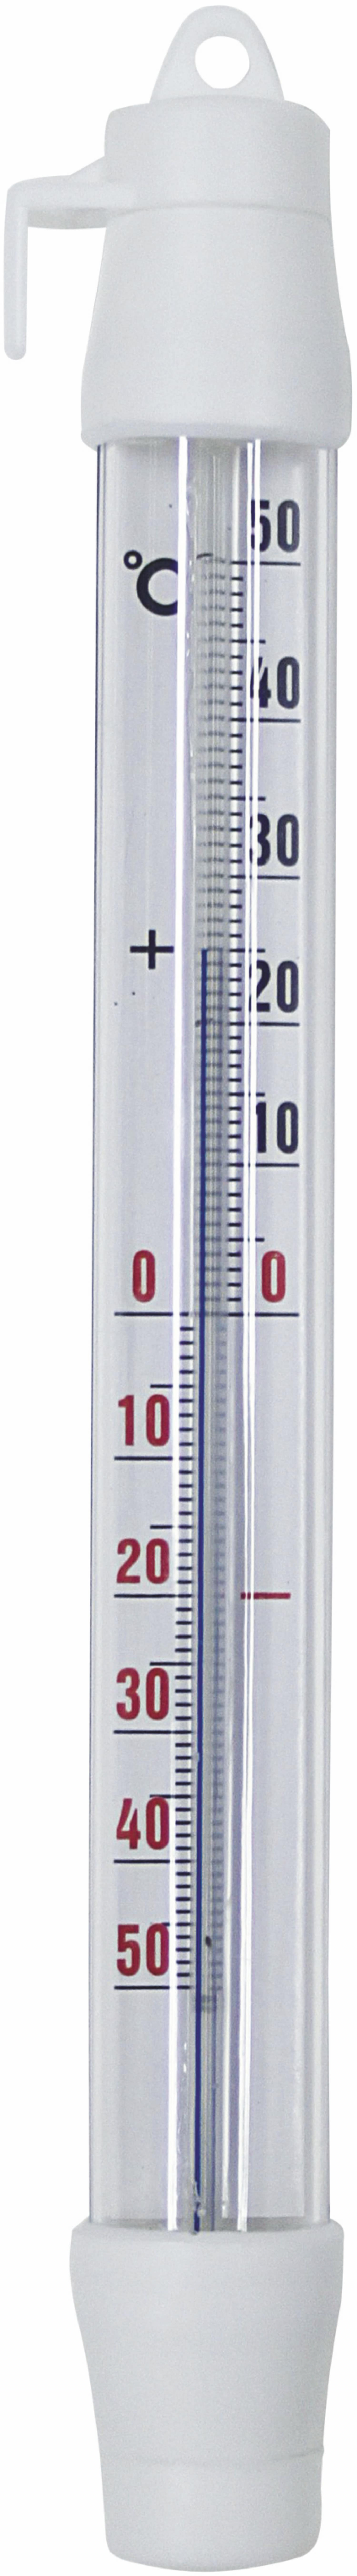 Thermometer 160026